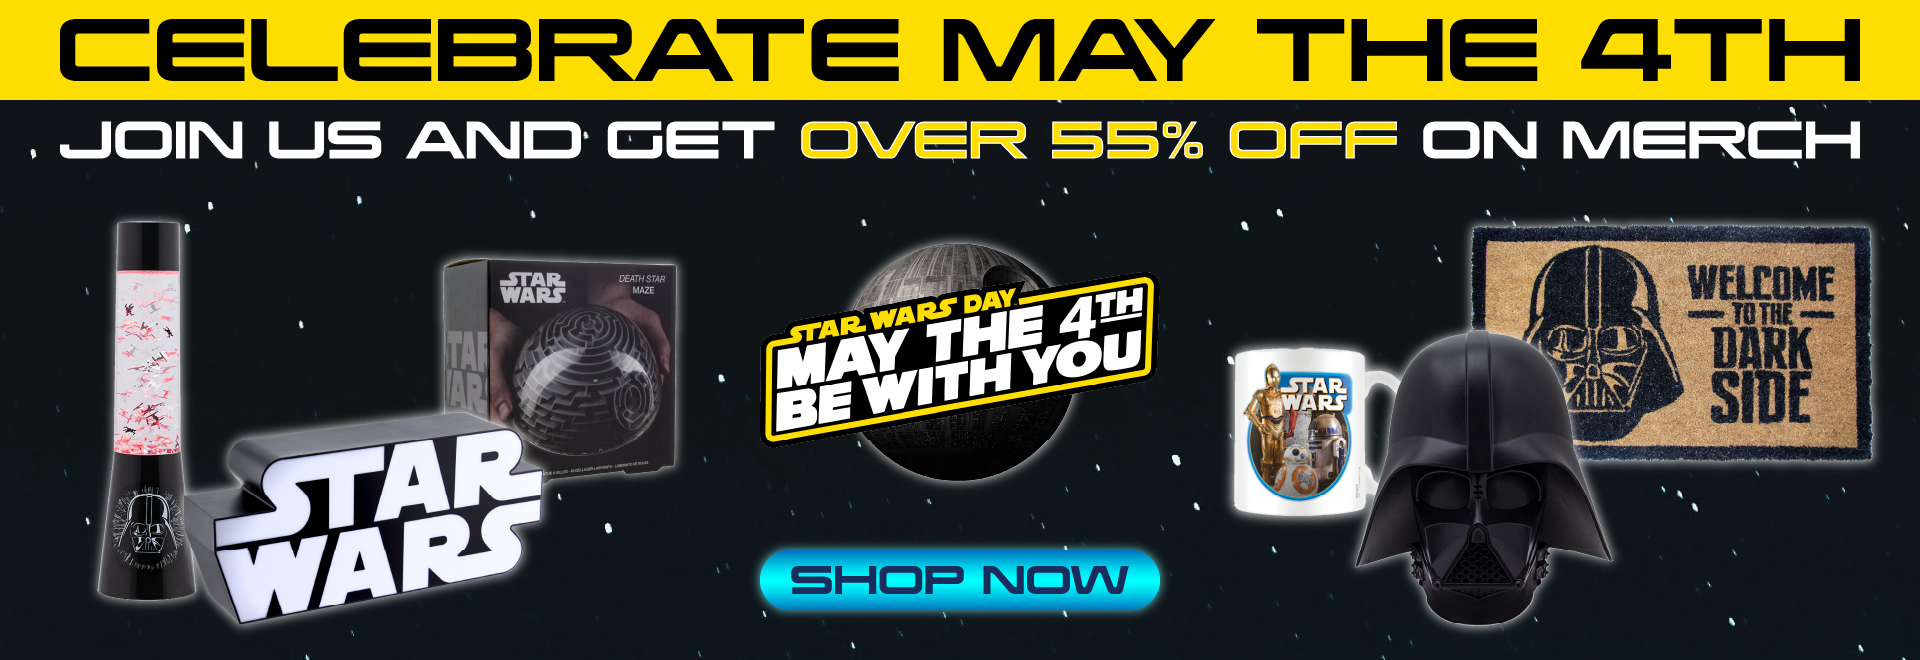 May the 4th - Star War Sale